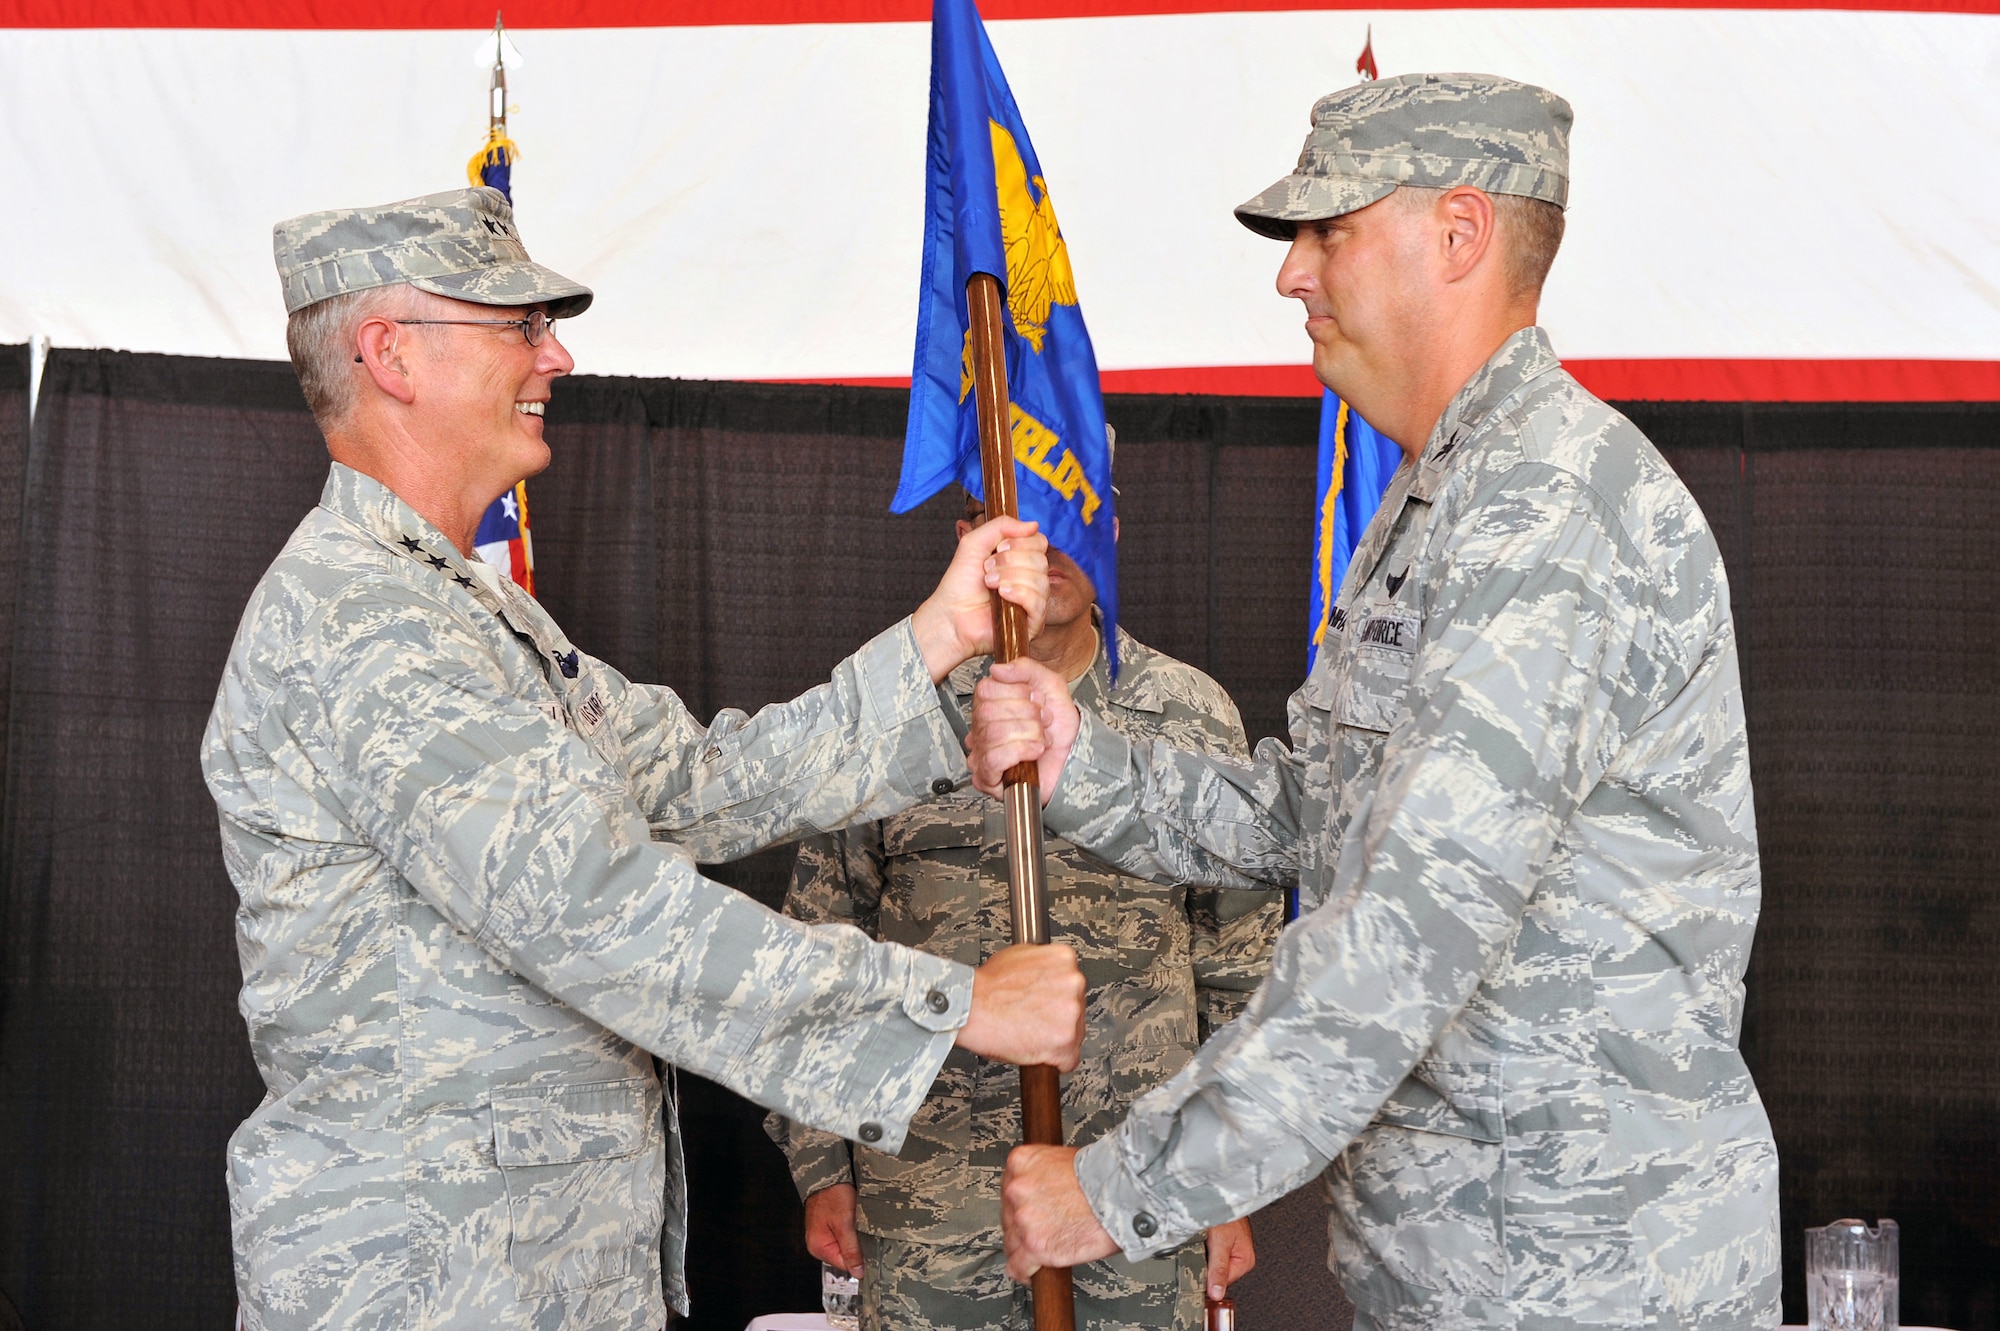 Lt. Gen. Robert Allardice, 18th Air Force commander, presents the 19th Airlift Wing guide-on to Col. Michael Minihan, 19th AW commander, during a change of command ceremony here Aug. 2. The 19th AW is the host unit to the largest C-130 base in the world.  (U.S. Air Force photo by Staff Sgt. Chris Willis)